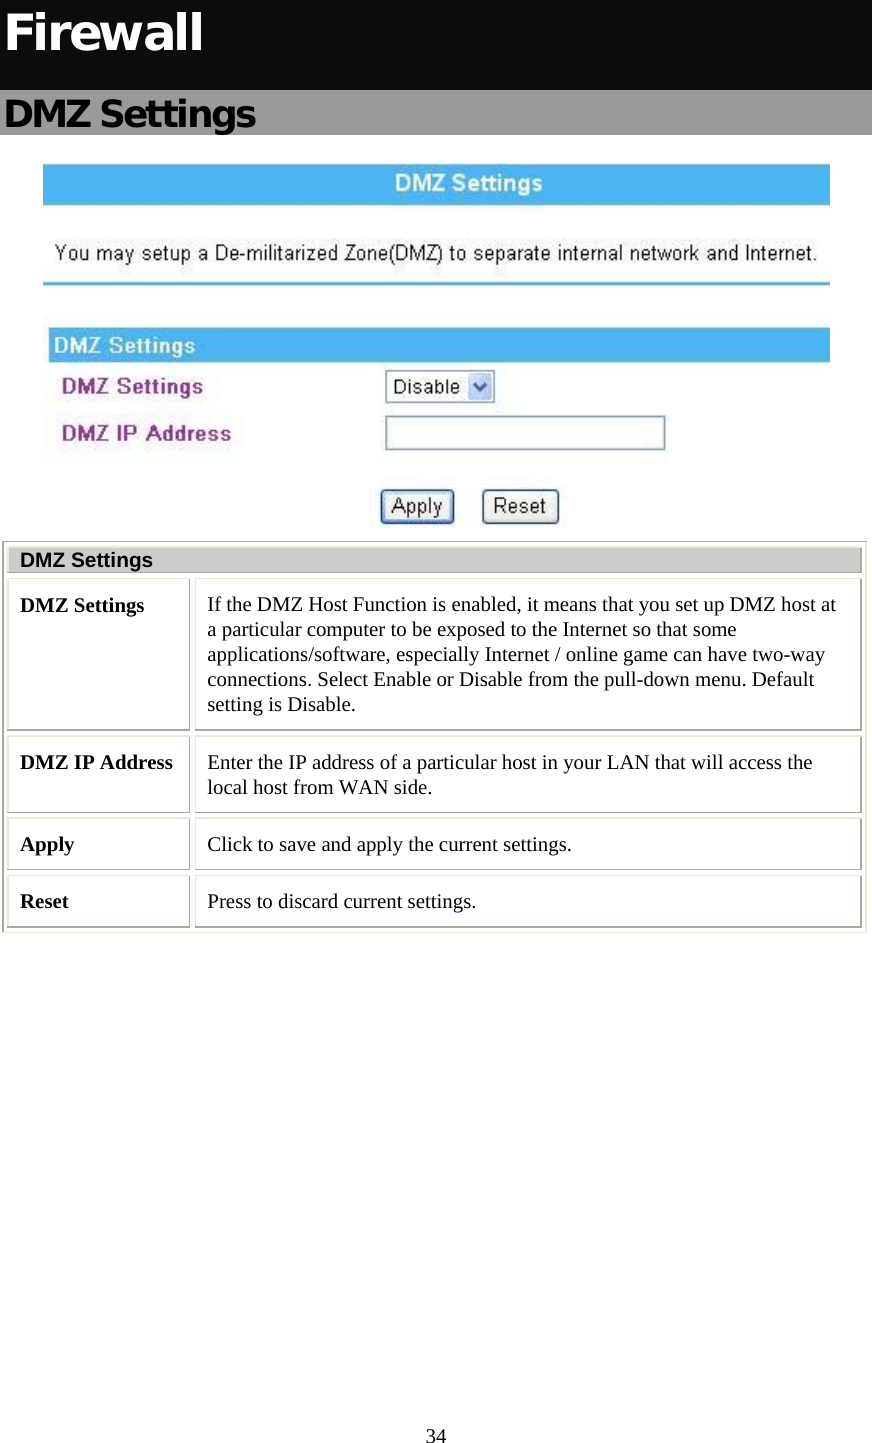   34 Firewall DMZ Settings  DMZ Settings DMZ Settings  If the DMZ Host Function is enabled, it means that you set up DMZ host at a particular computer to be exposed to the Internet so that some applications/software, especially Internet / online game can have two-way connections. Select Enable or Disable from the pull-down menu. Default setting is Disable. DMZ IP Address  Enter the IP address of a particular host in your LAN that will access the local host from WAN side. Apply  Click to save and apply the current settings. Reset  Press to discard current settings.  